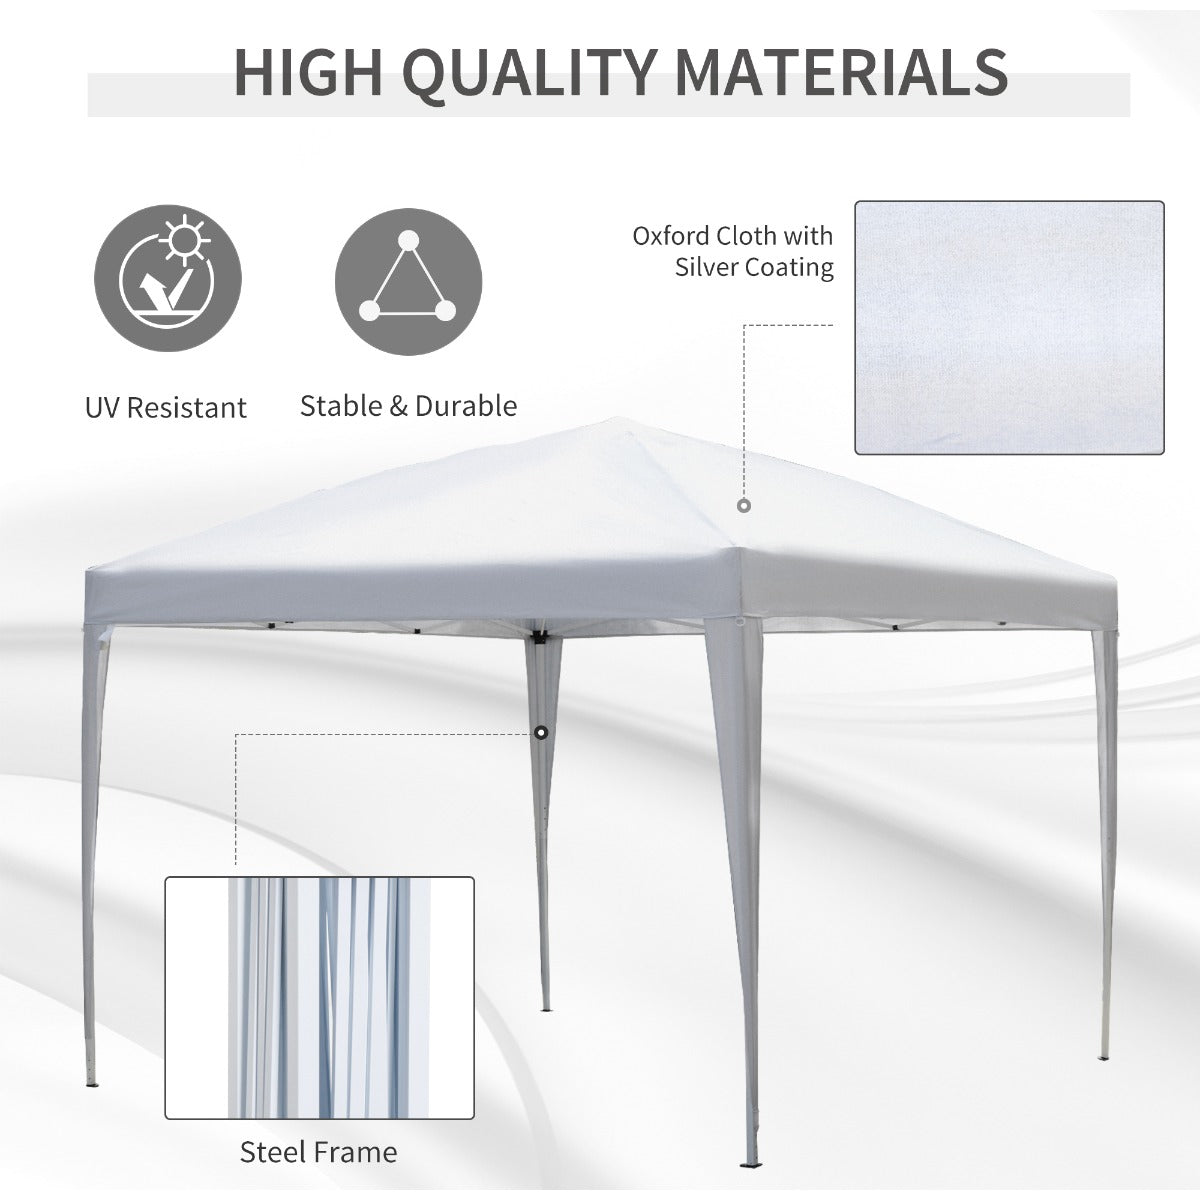 Outsunny 3 x 3 meter Garden Heavy Duty Pop Up Gazebo Marquee Party Tent Folding Wedding Canopy-White